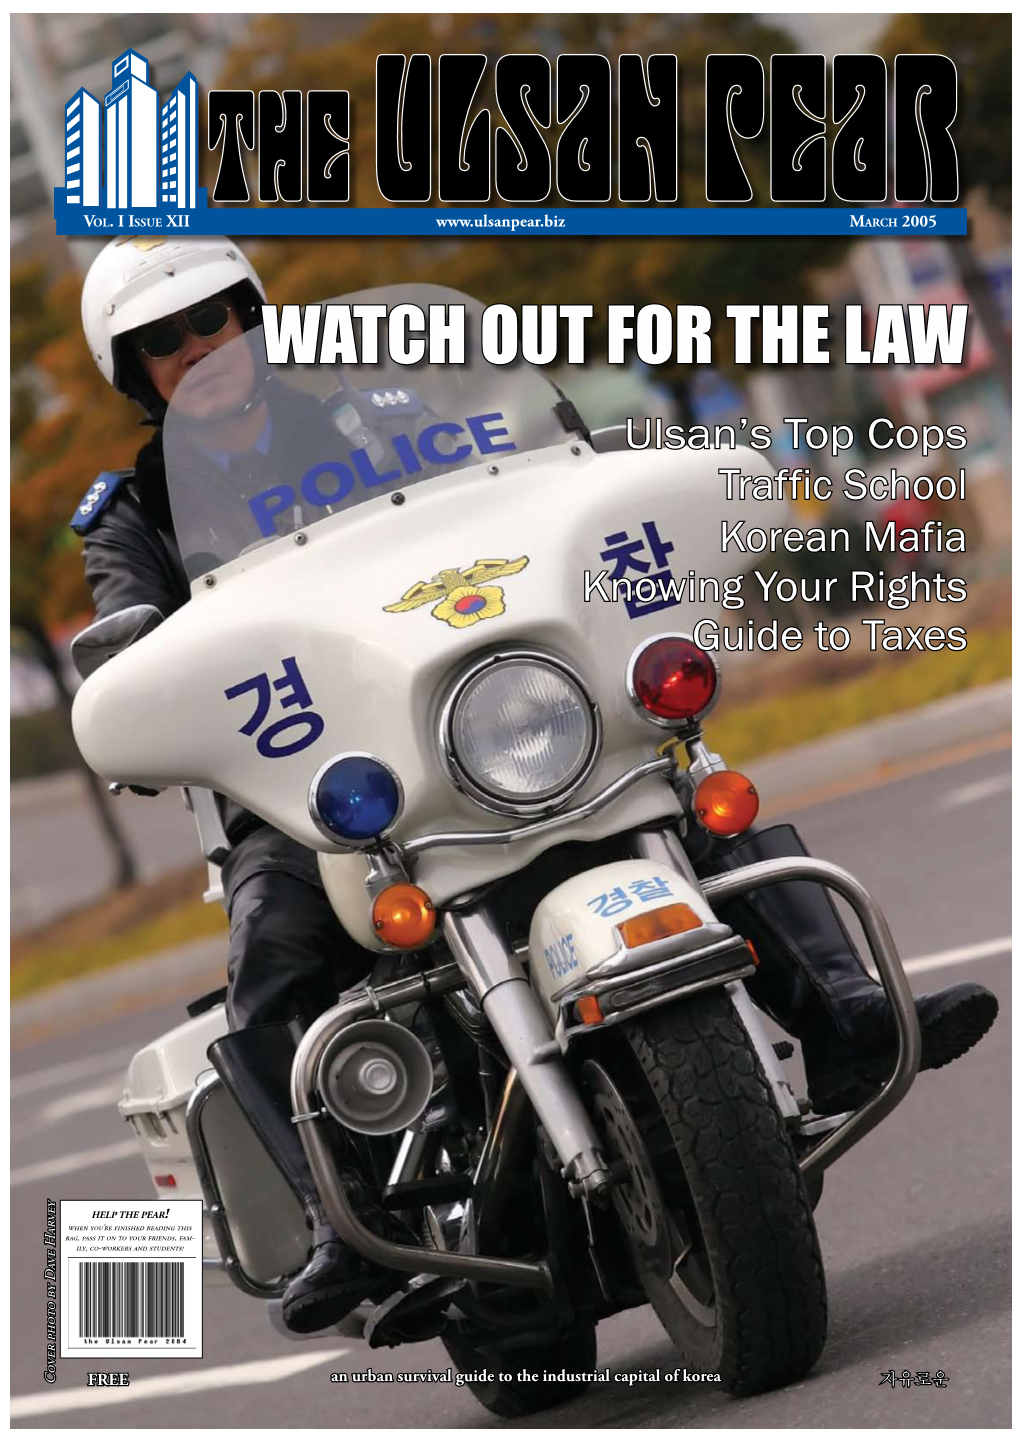 WATCH out for the LAW Ulsan’S Top Cops Traffic School Korean Mafia Knowing Your Rights Guide to Taxes